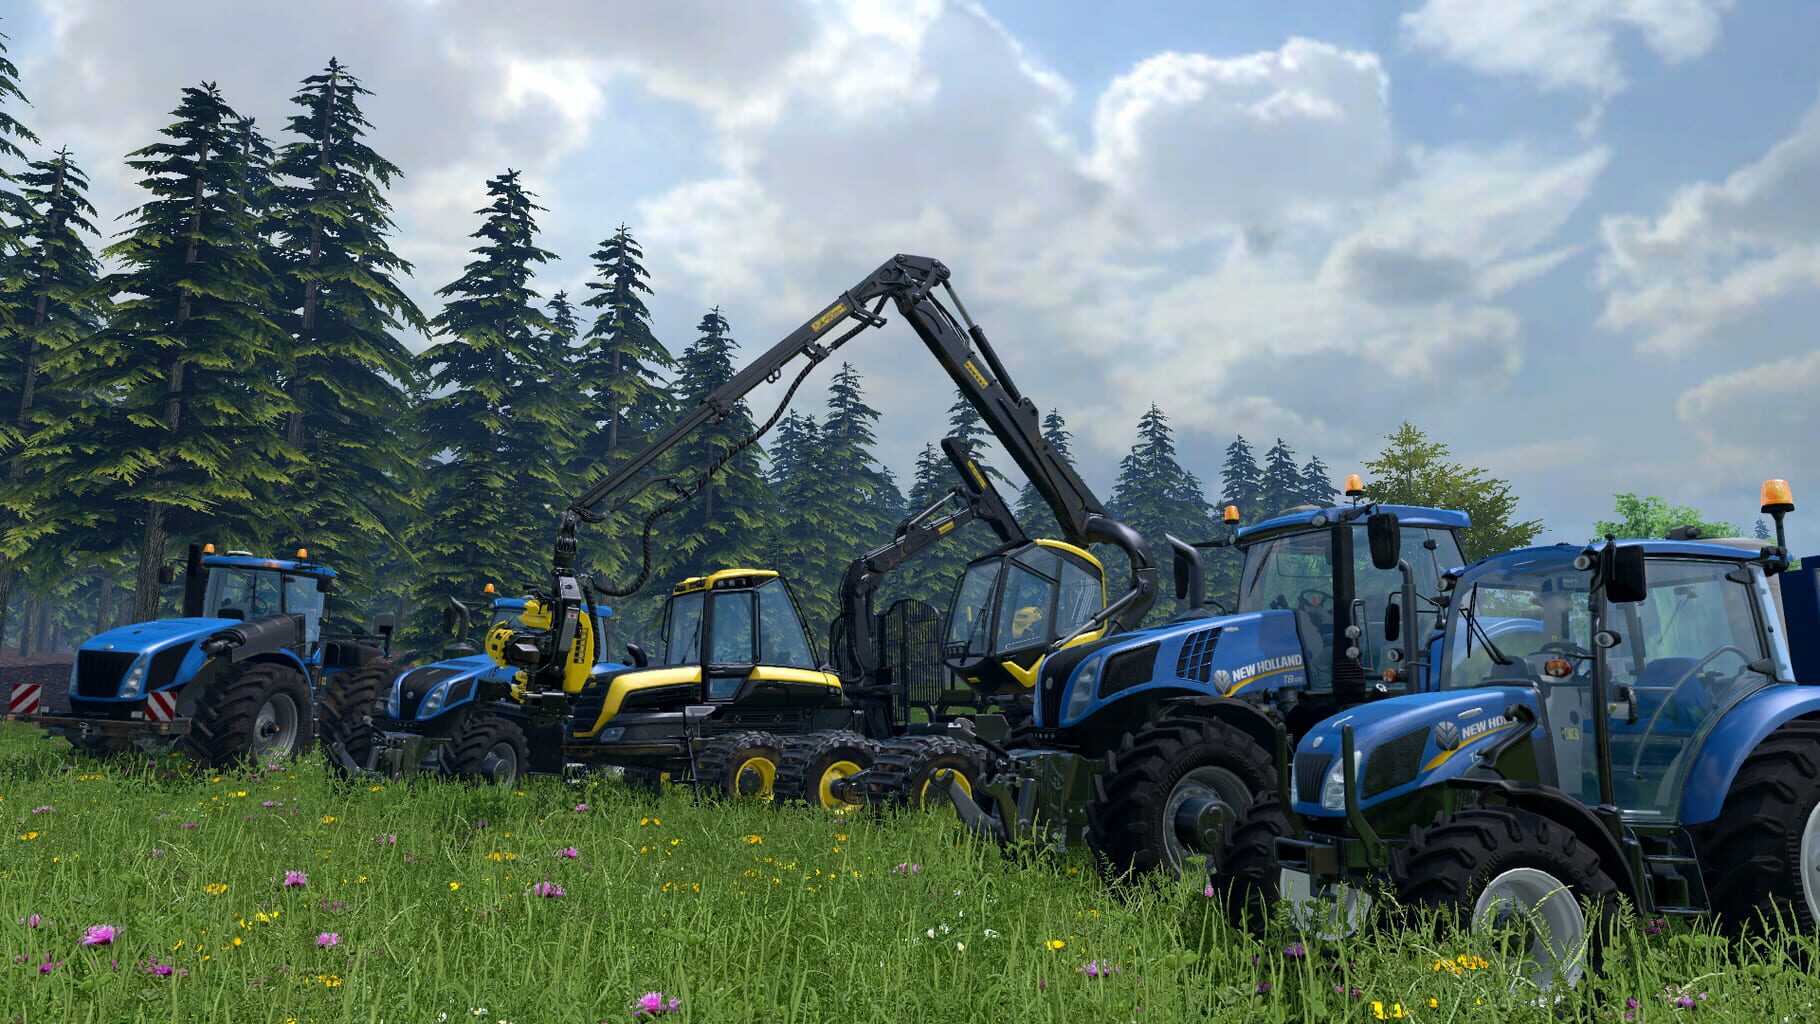 cheat-codes-for-farming-simulator-15-how-to-get-unlimited-money-on